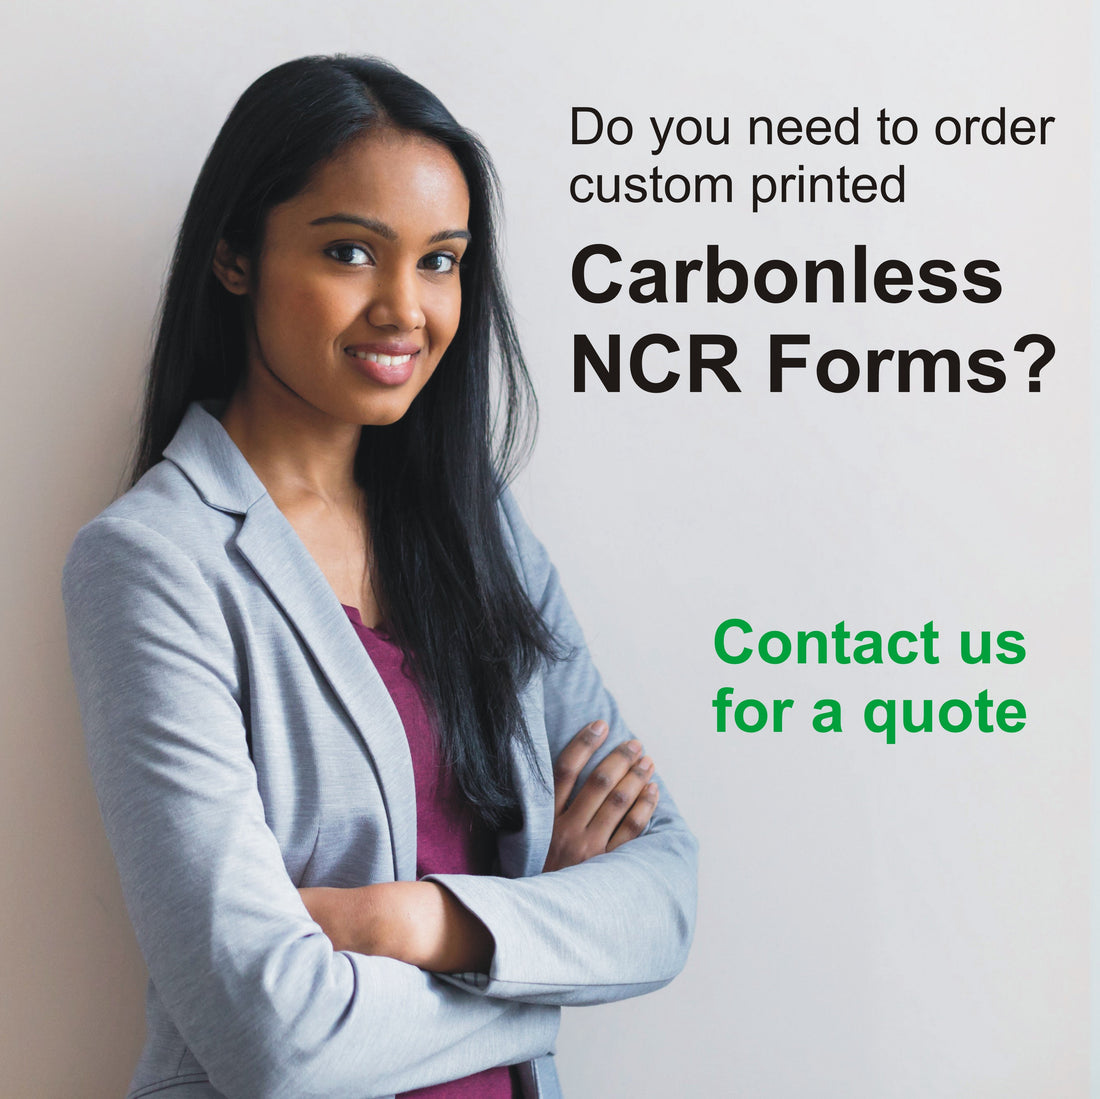 Do you need to order Carbonless NCR Forms?